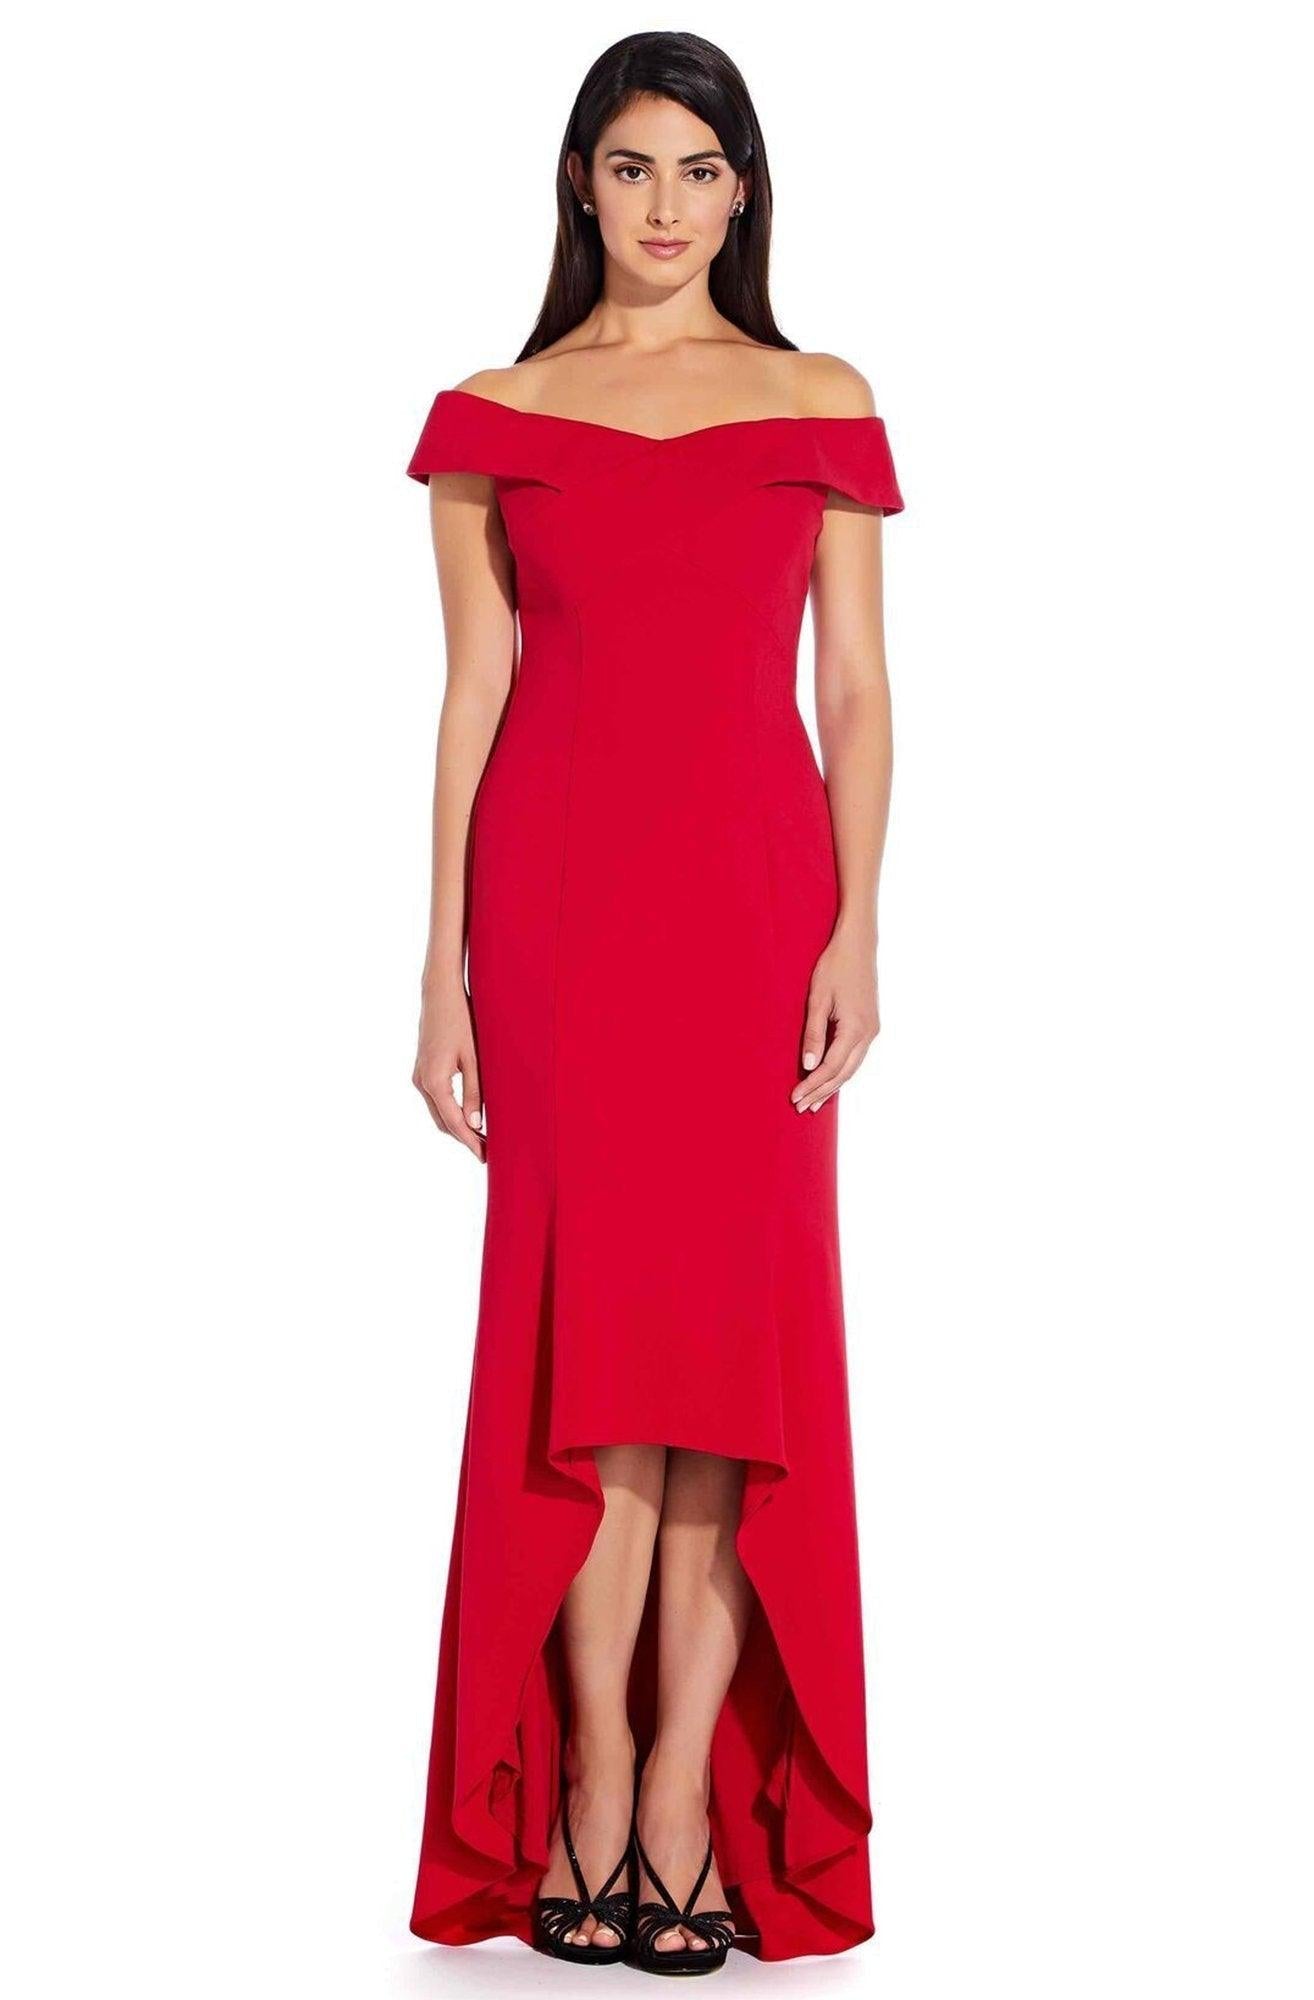 Adrianna Papell High Low Formal Dress AP1E206023 - The Dress Outlet